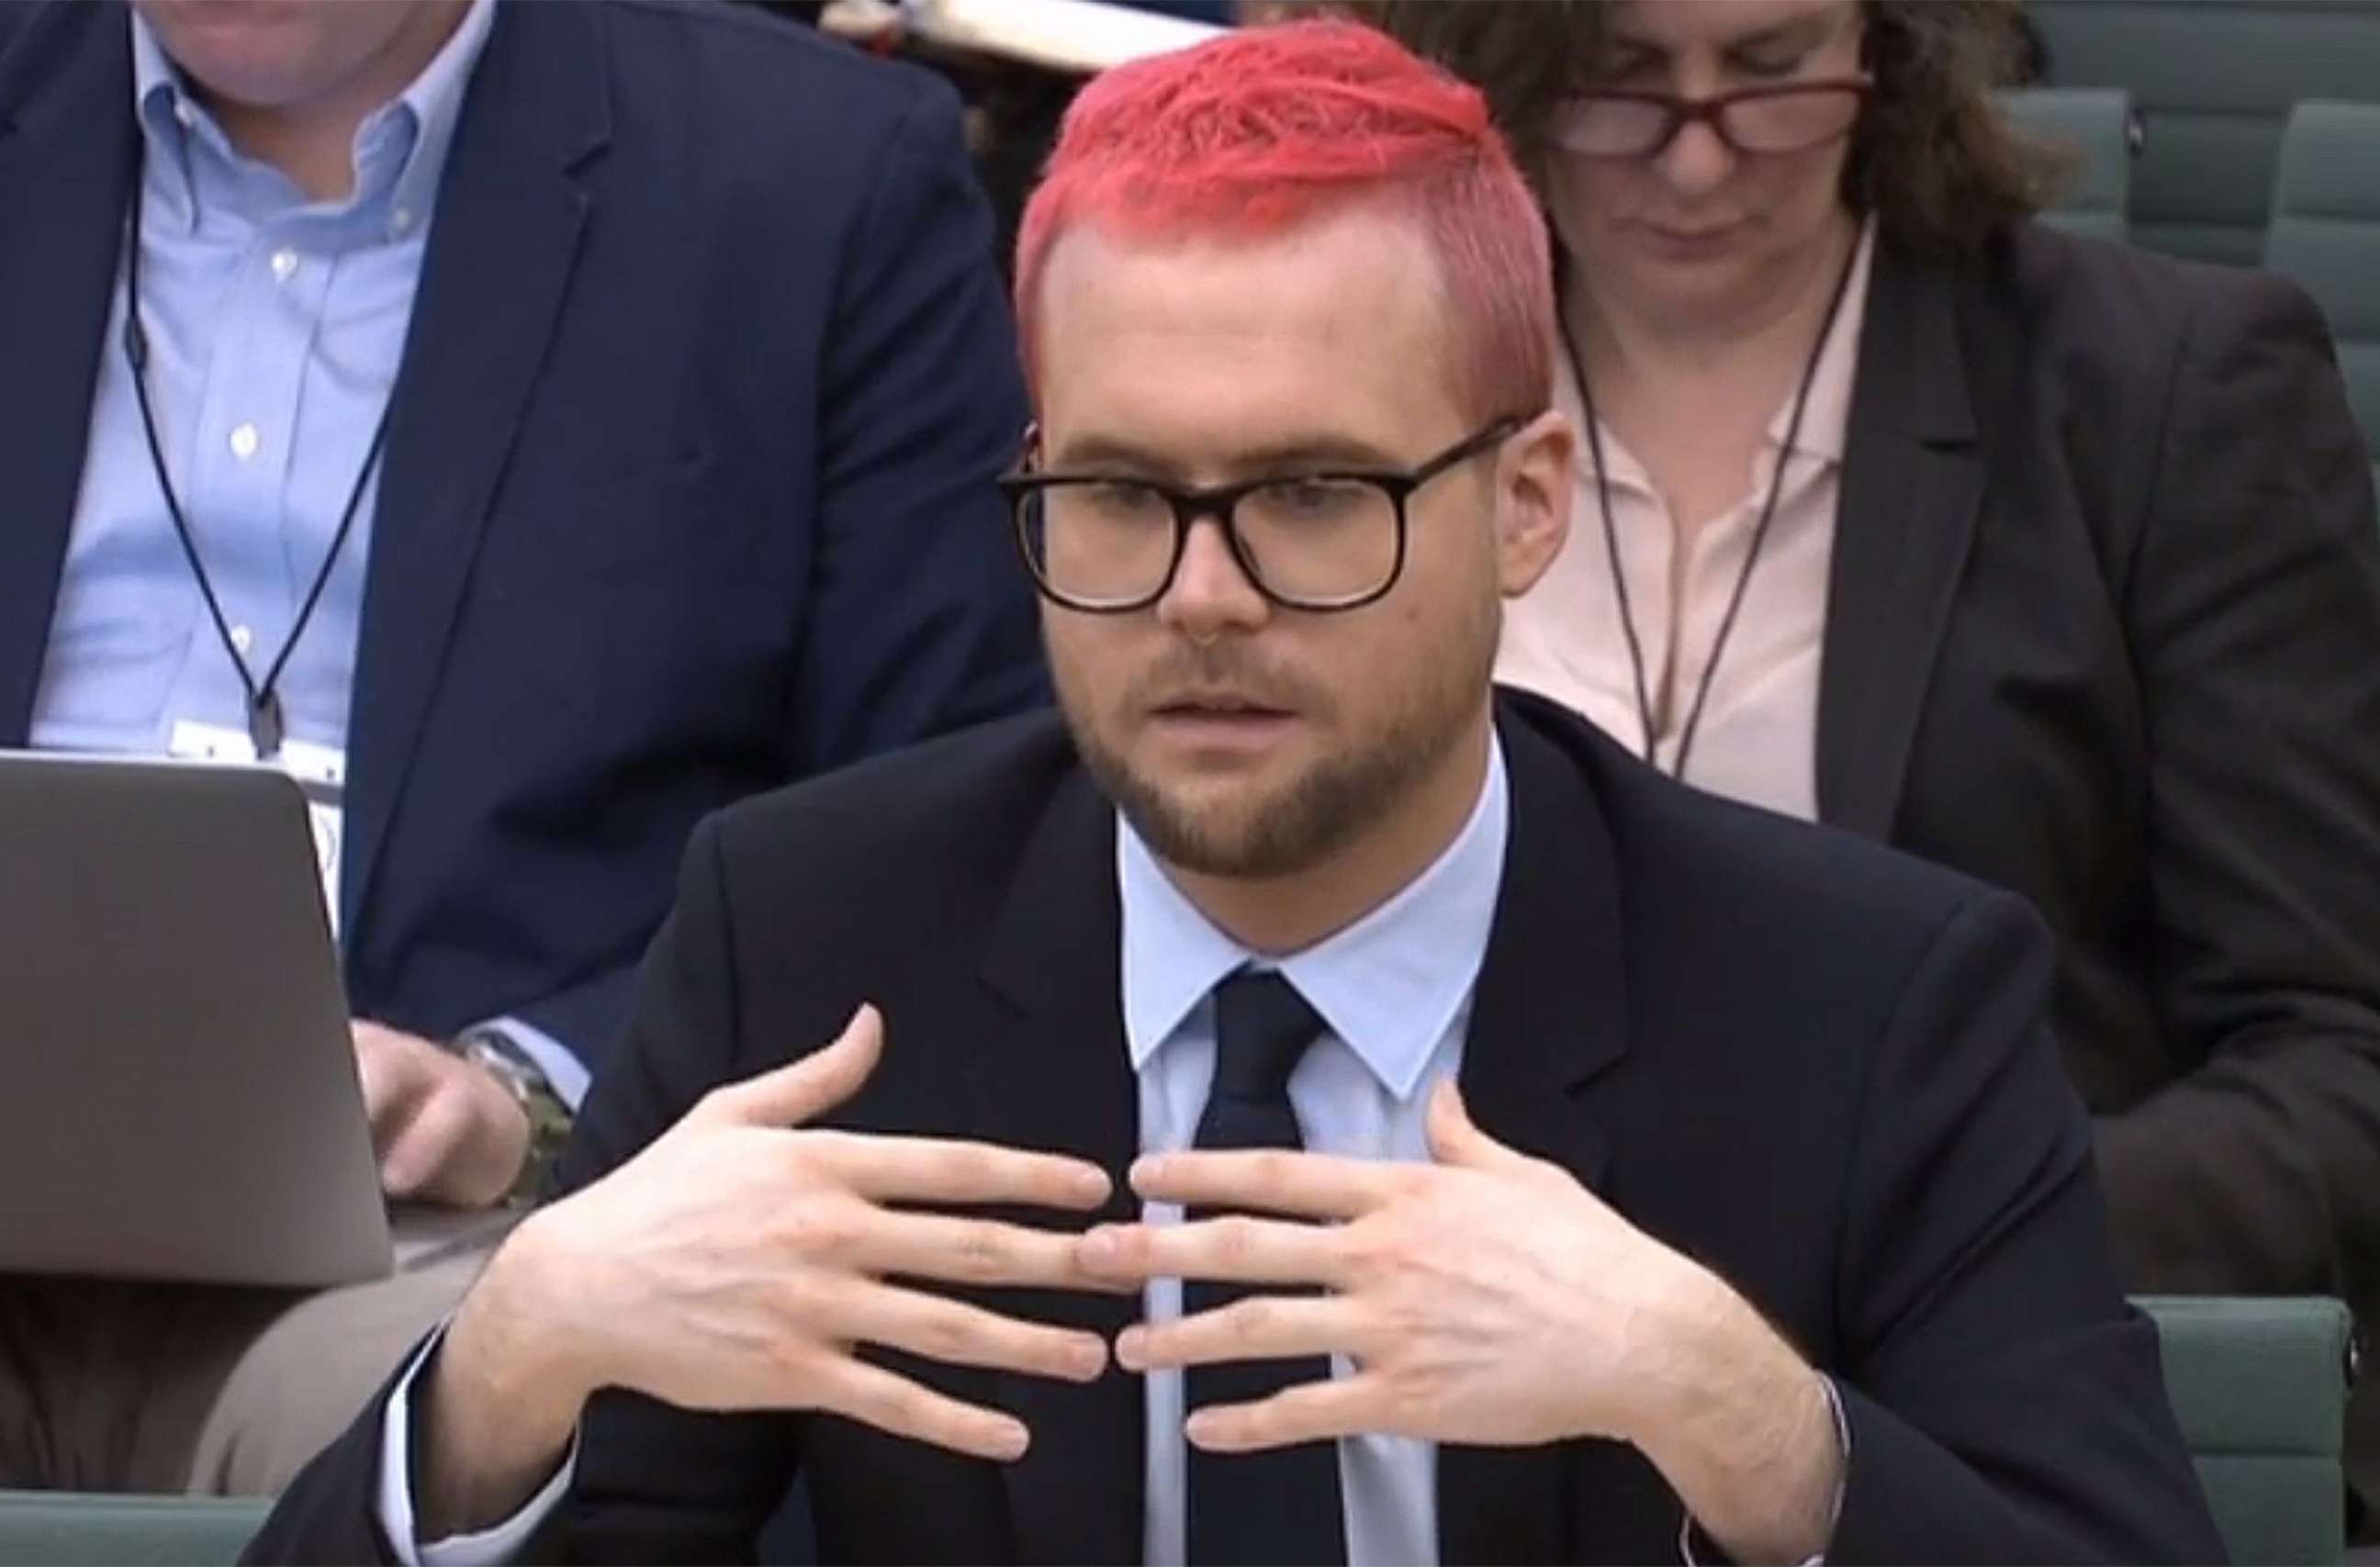 PHOTO: Christopher Wylie appears as a witness before the Digital, Culture, Media and Sport Committee of members of the British parliament at the Houses of Parliament in central London on March 27, 2018.